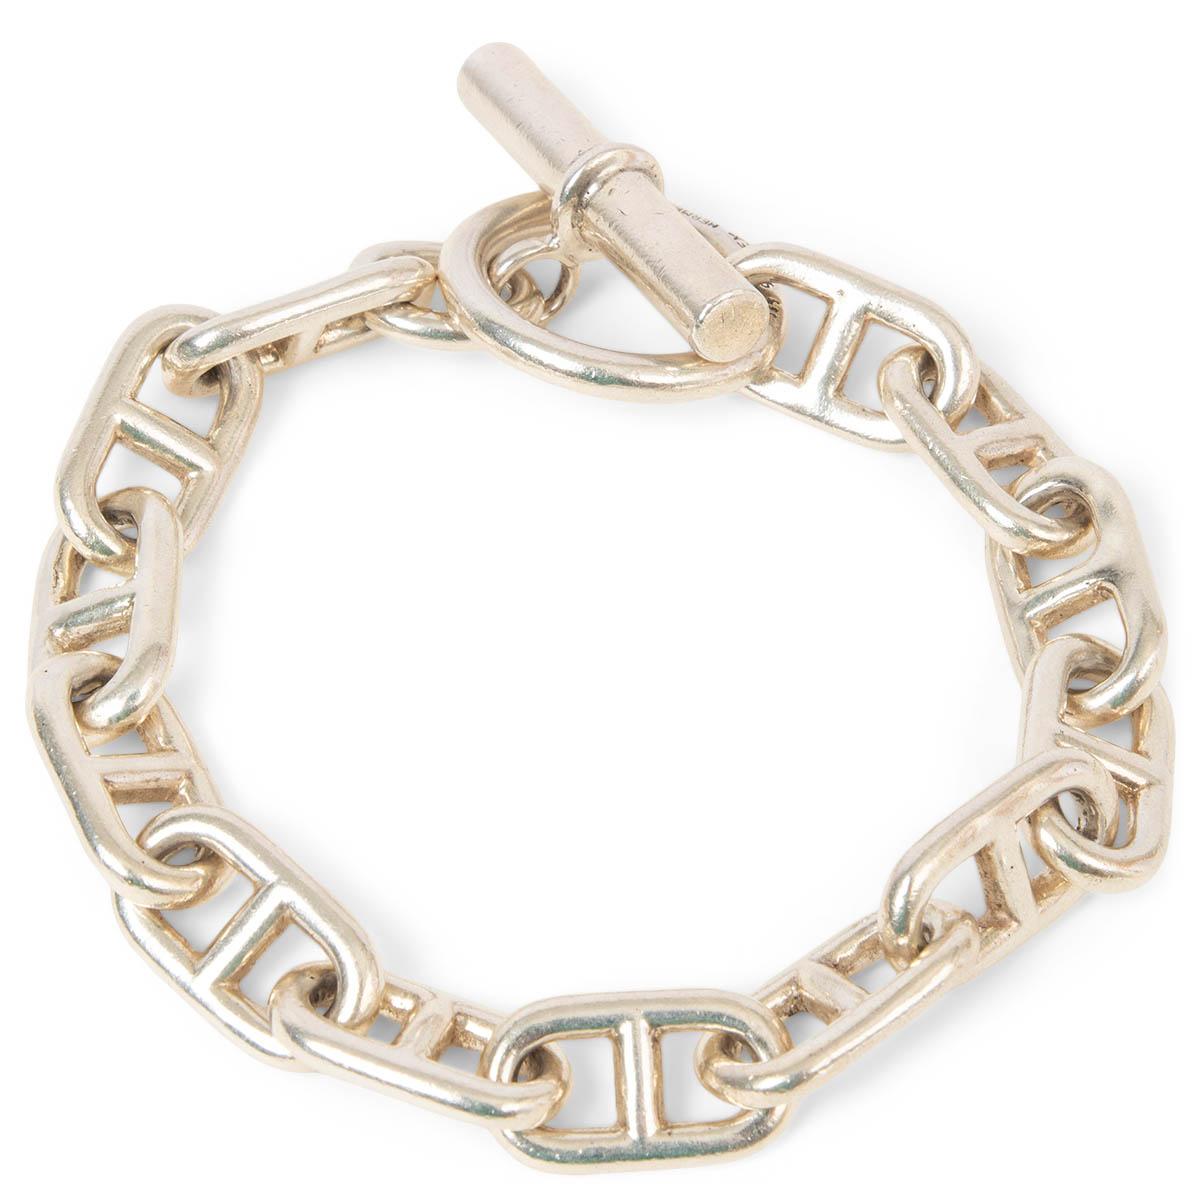 100% authentic Hermès Chaine D'Ancre bracelet in sterling silver. Has been worn and shows some natural wear and scratches. Overall in excellent condition. 

Measurements
Width	1cm (0.4in)
Length	23cm (9in)
Circumference	18cm (7in)
Hardware	Sterling